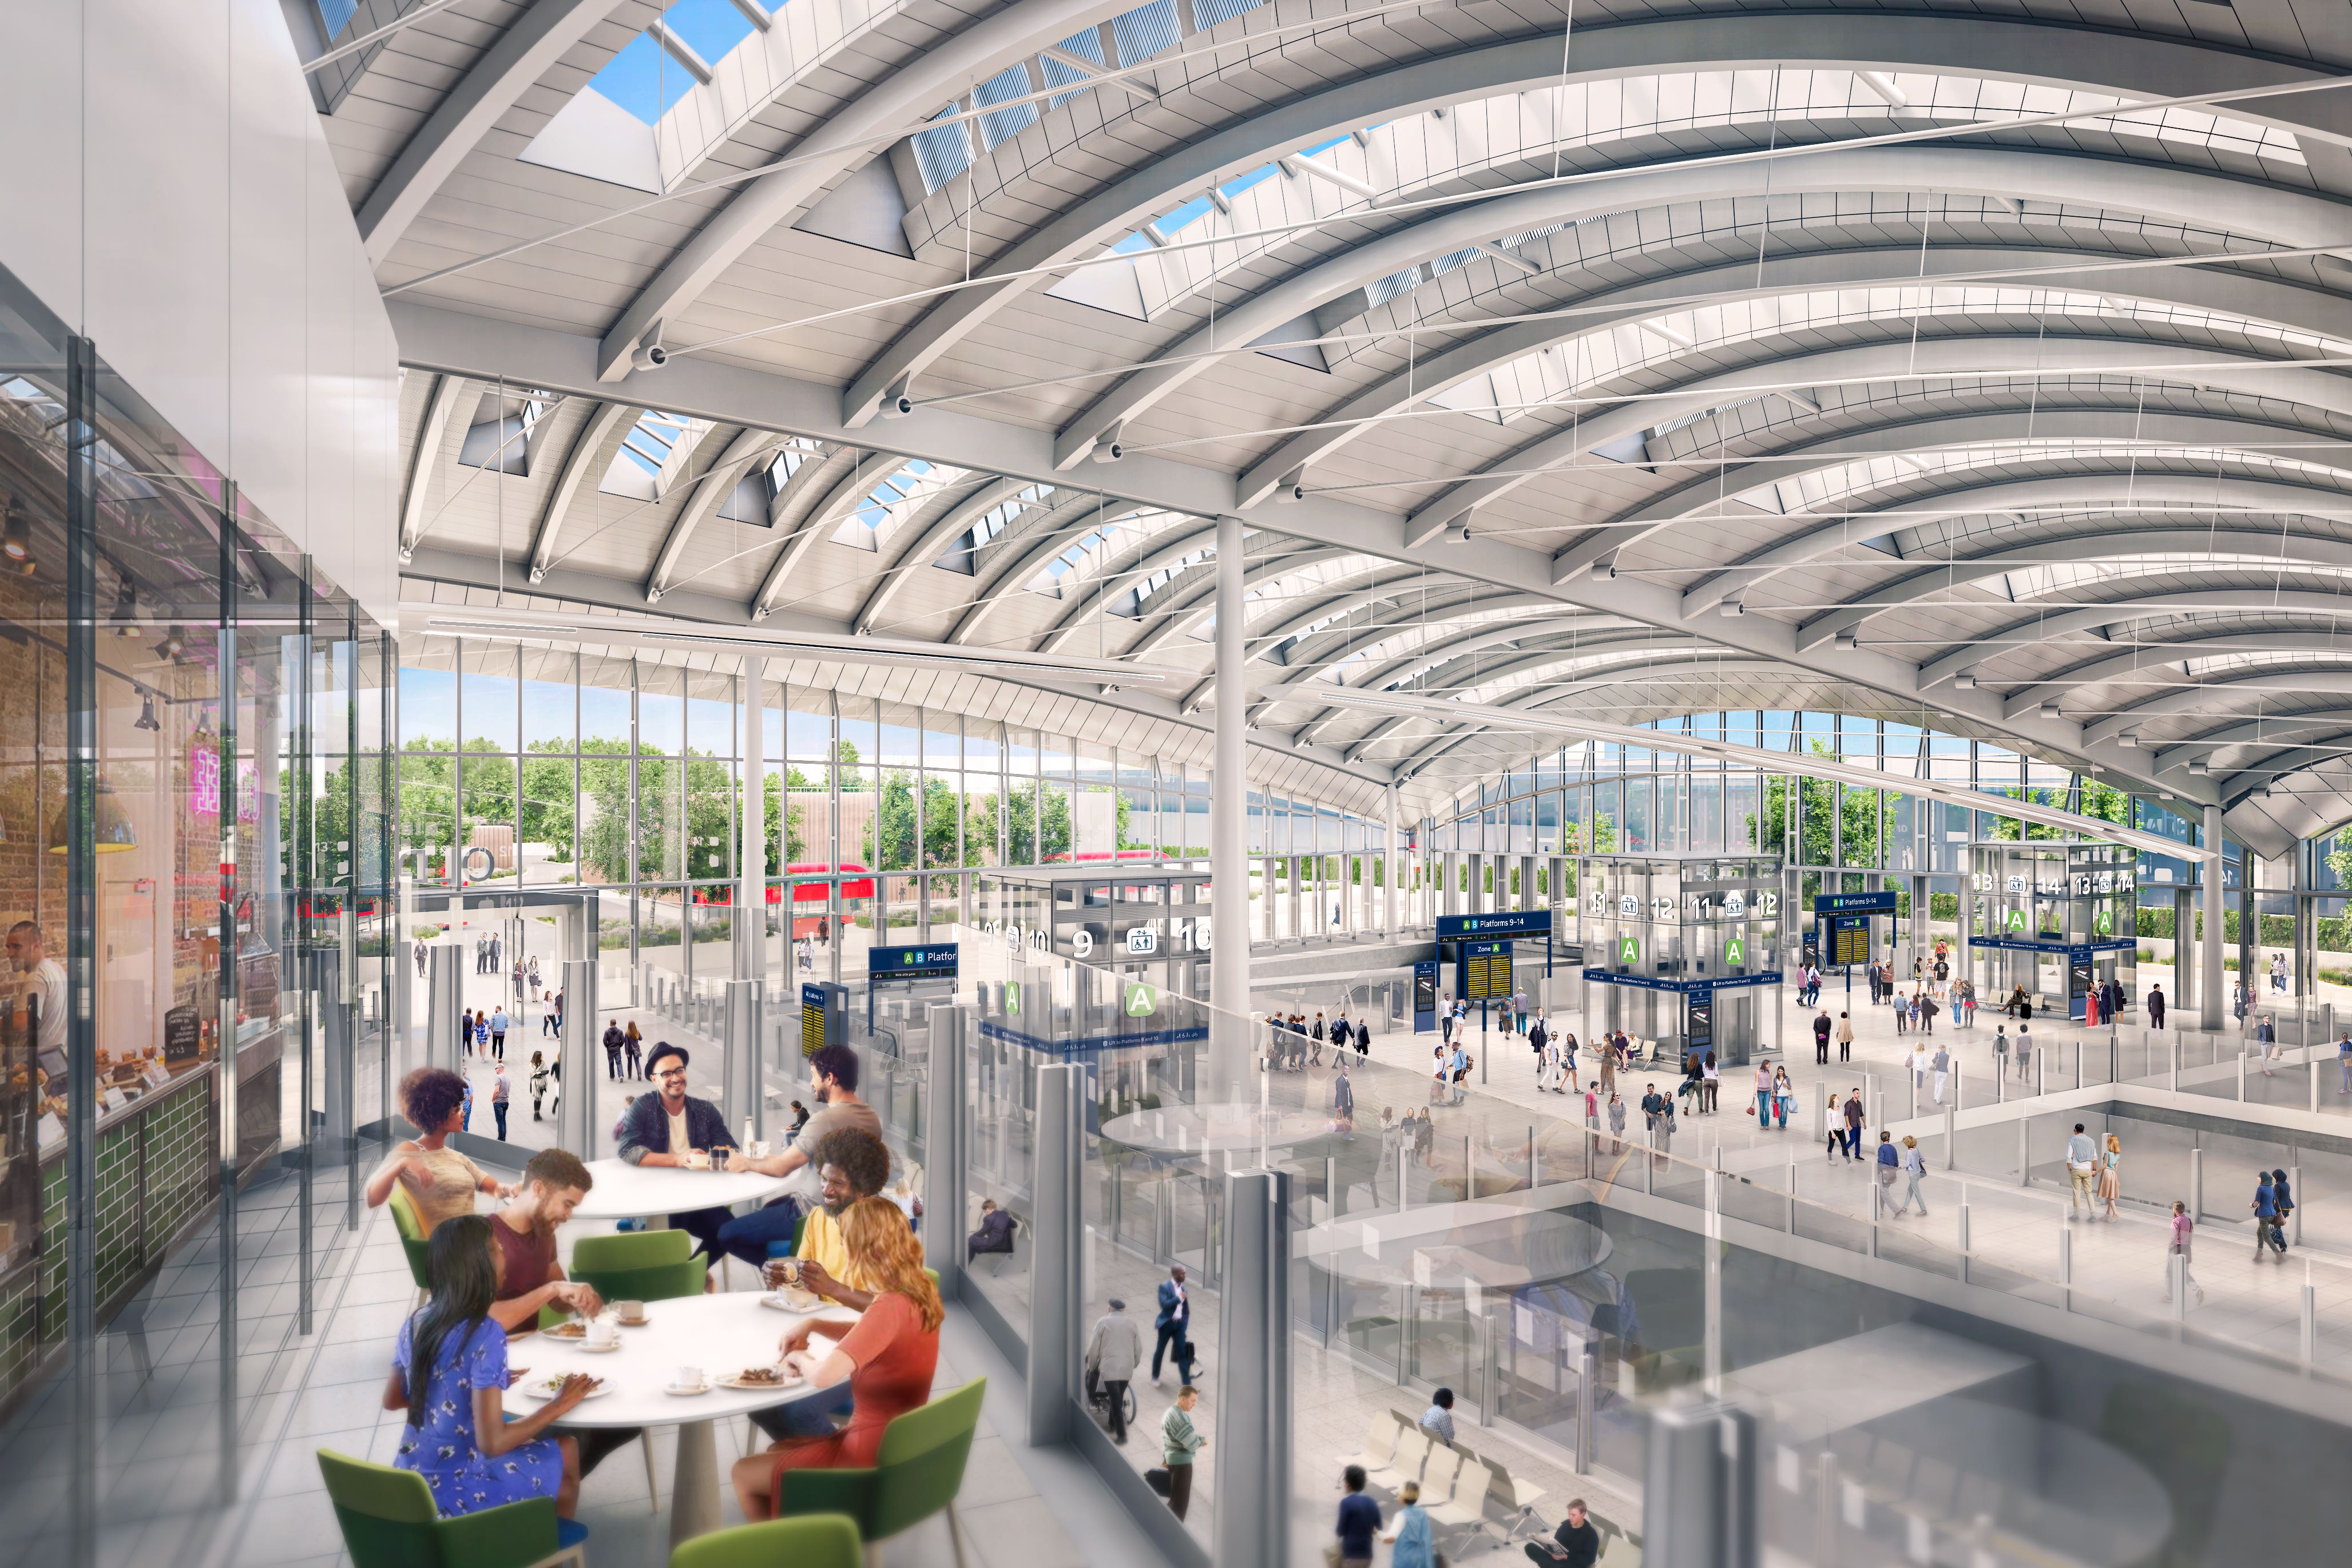 Old Oak Common has been designed to be an open plan station to allow for natural ventilation (HS2 Ltd/PA)